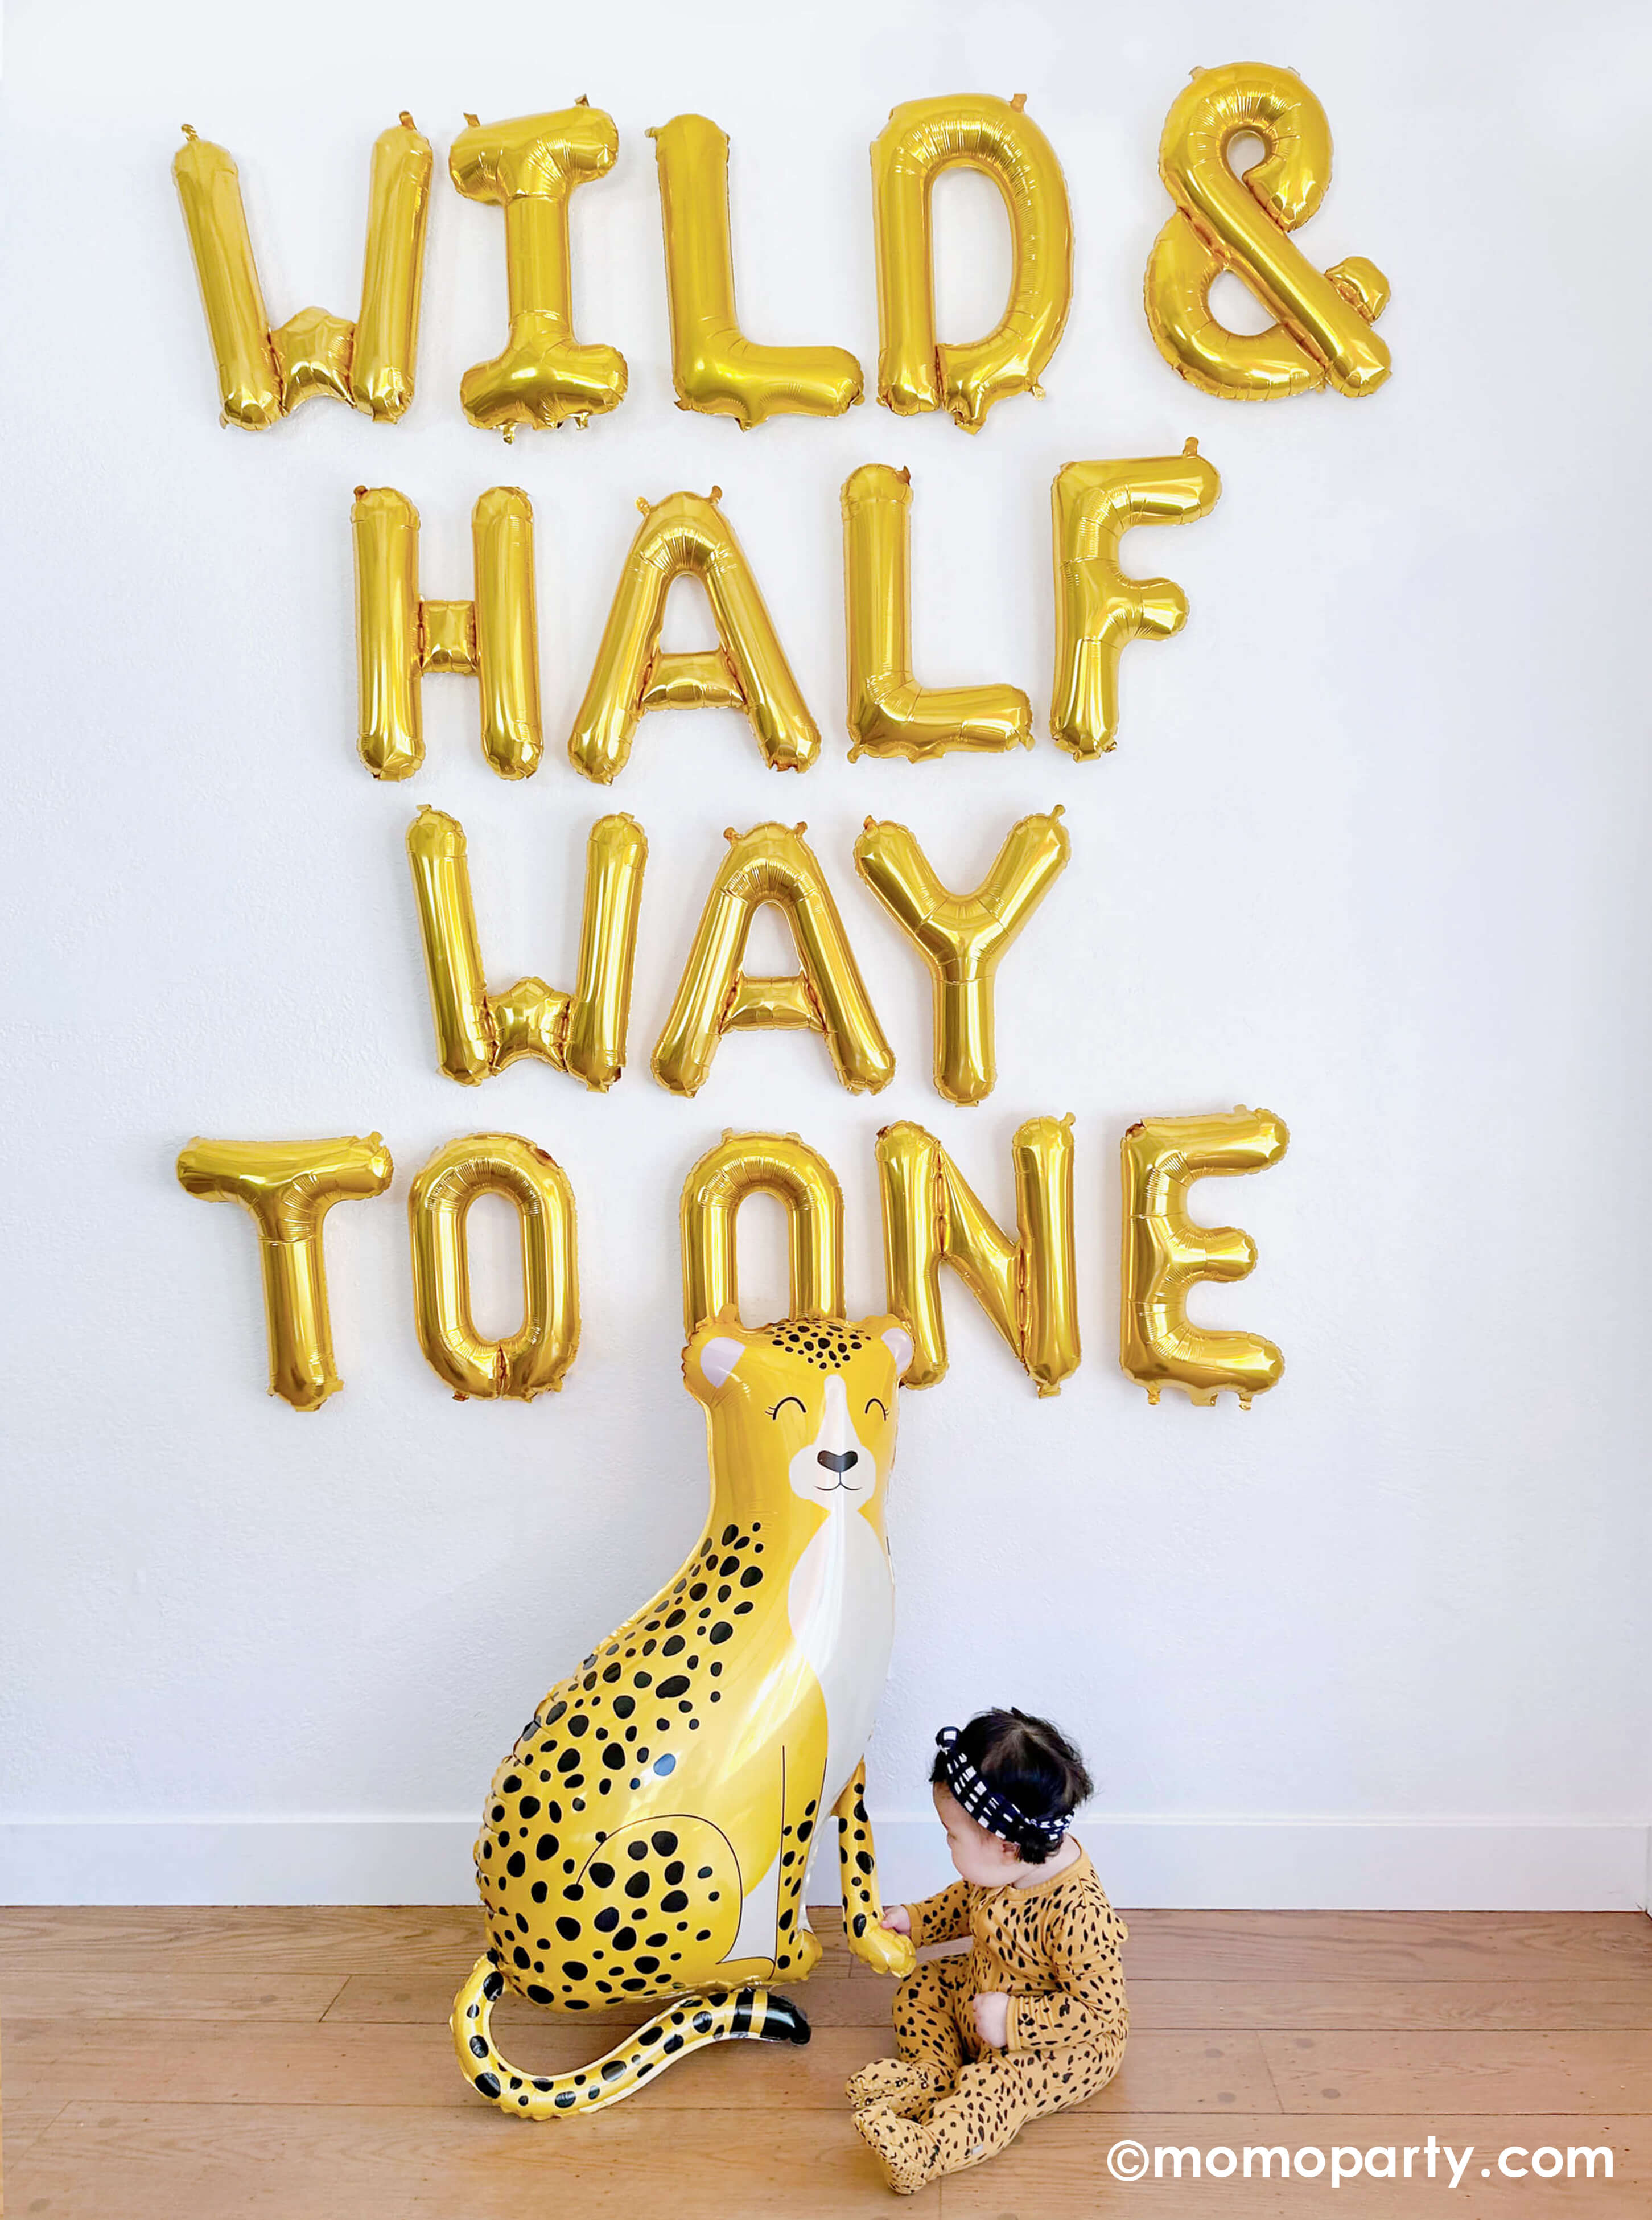 A balloon wall featuring Momo Party's "Wild & Half Way To One" 16" Mylar Letter Balloons by Northstar Letter Balloons. At the bottom of the wall sits Momo Party's baby cheetah shaped foil balloon by Betallic Balloons and a 6-month baby girl in her cheetah print onese reaching out her hand to hold the cheetah, all makes a great inspiration for an adorable baby's half birthday party.